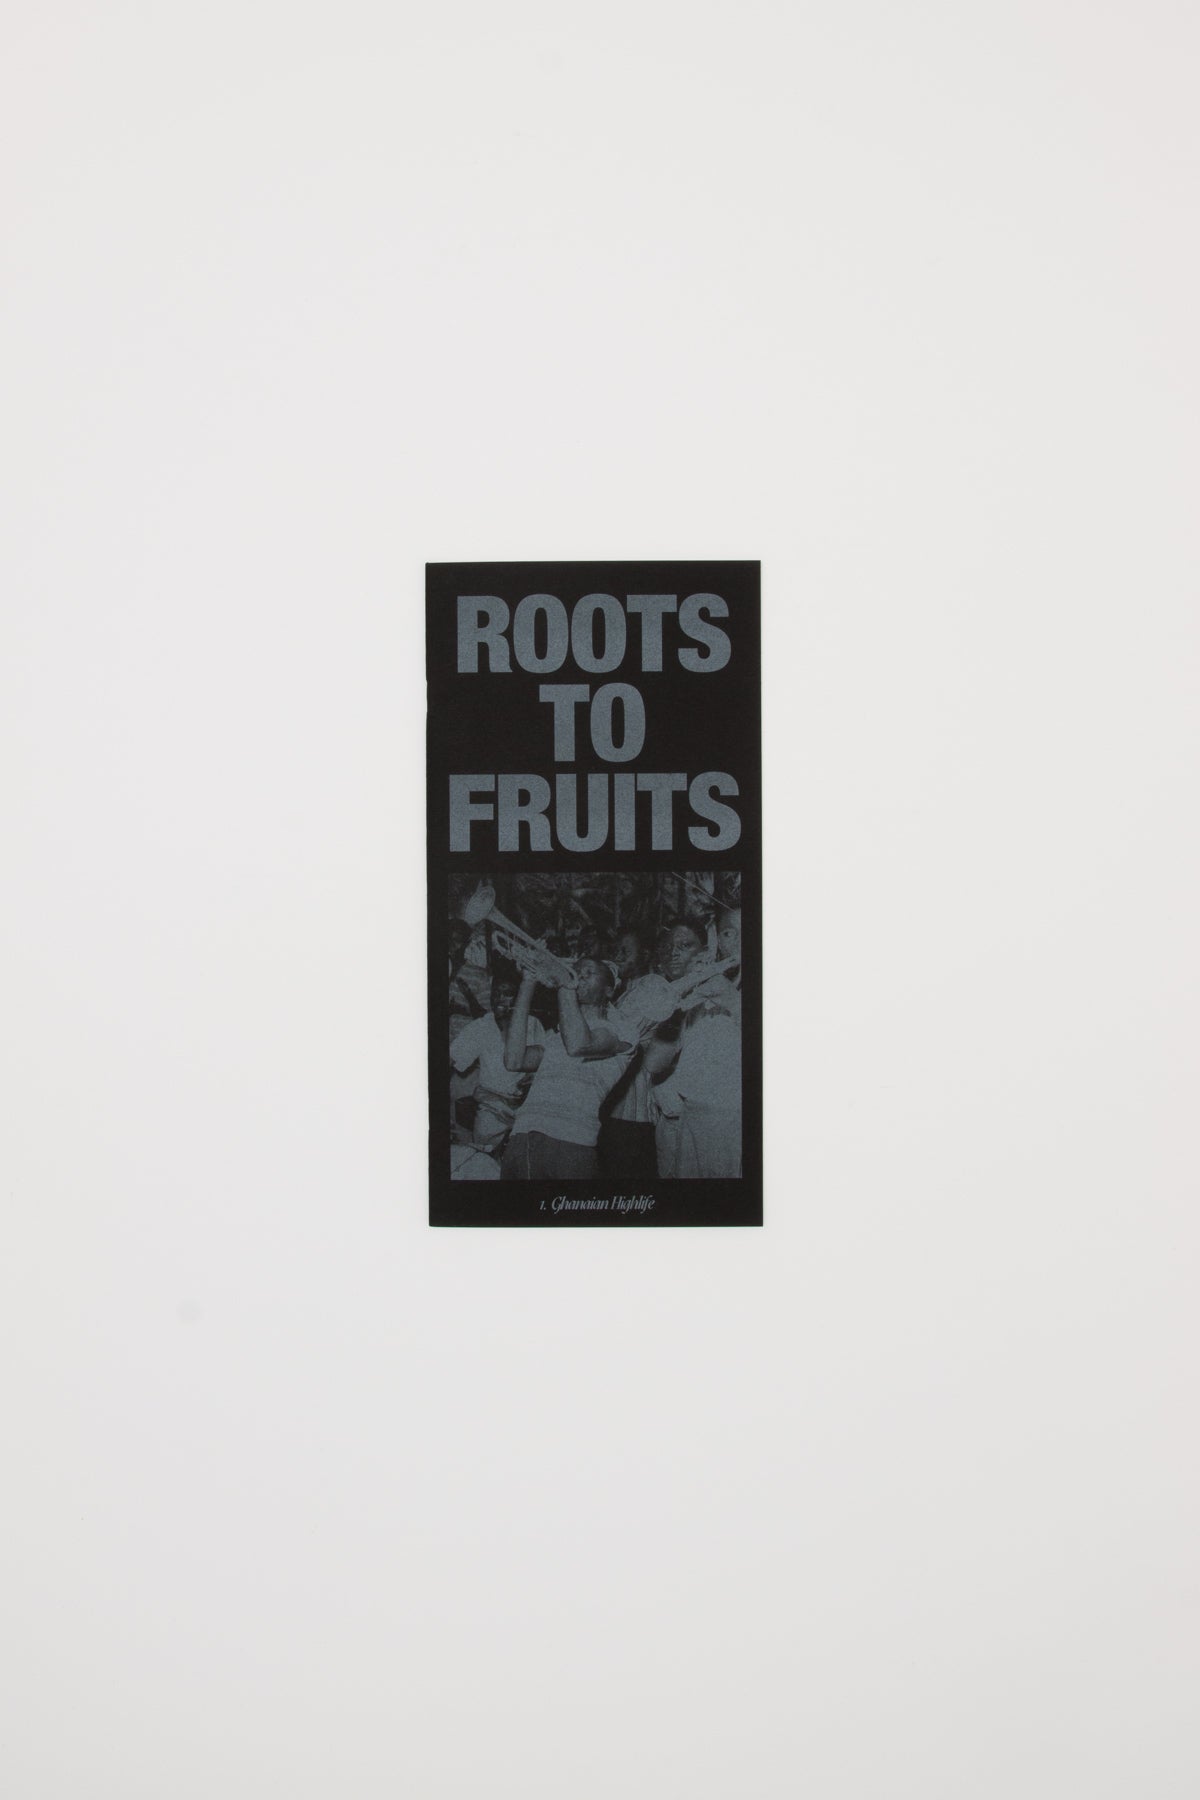 Roots to Fruits No. 1. Ghanaian Highlife